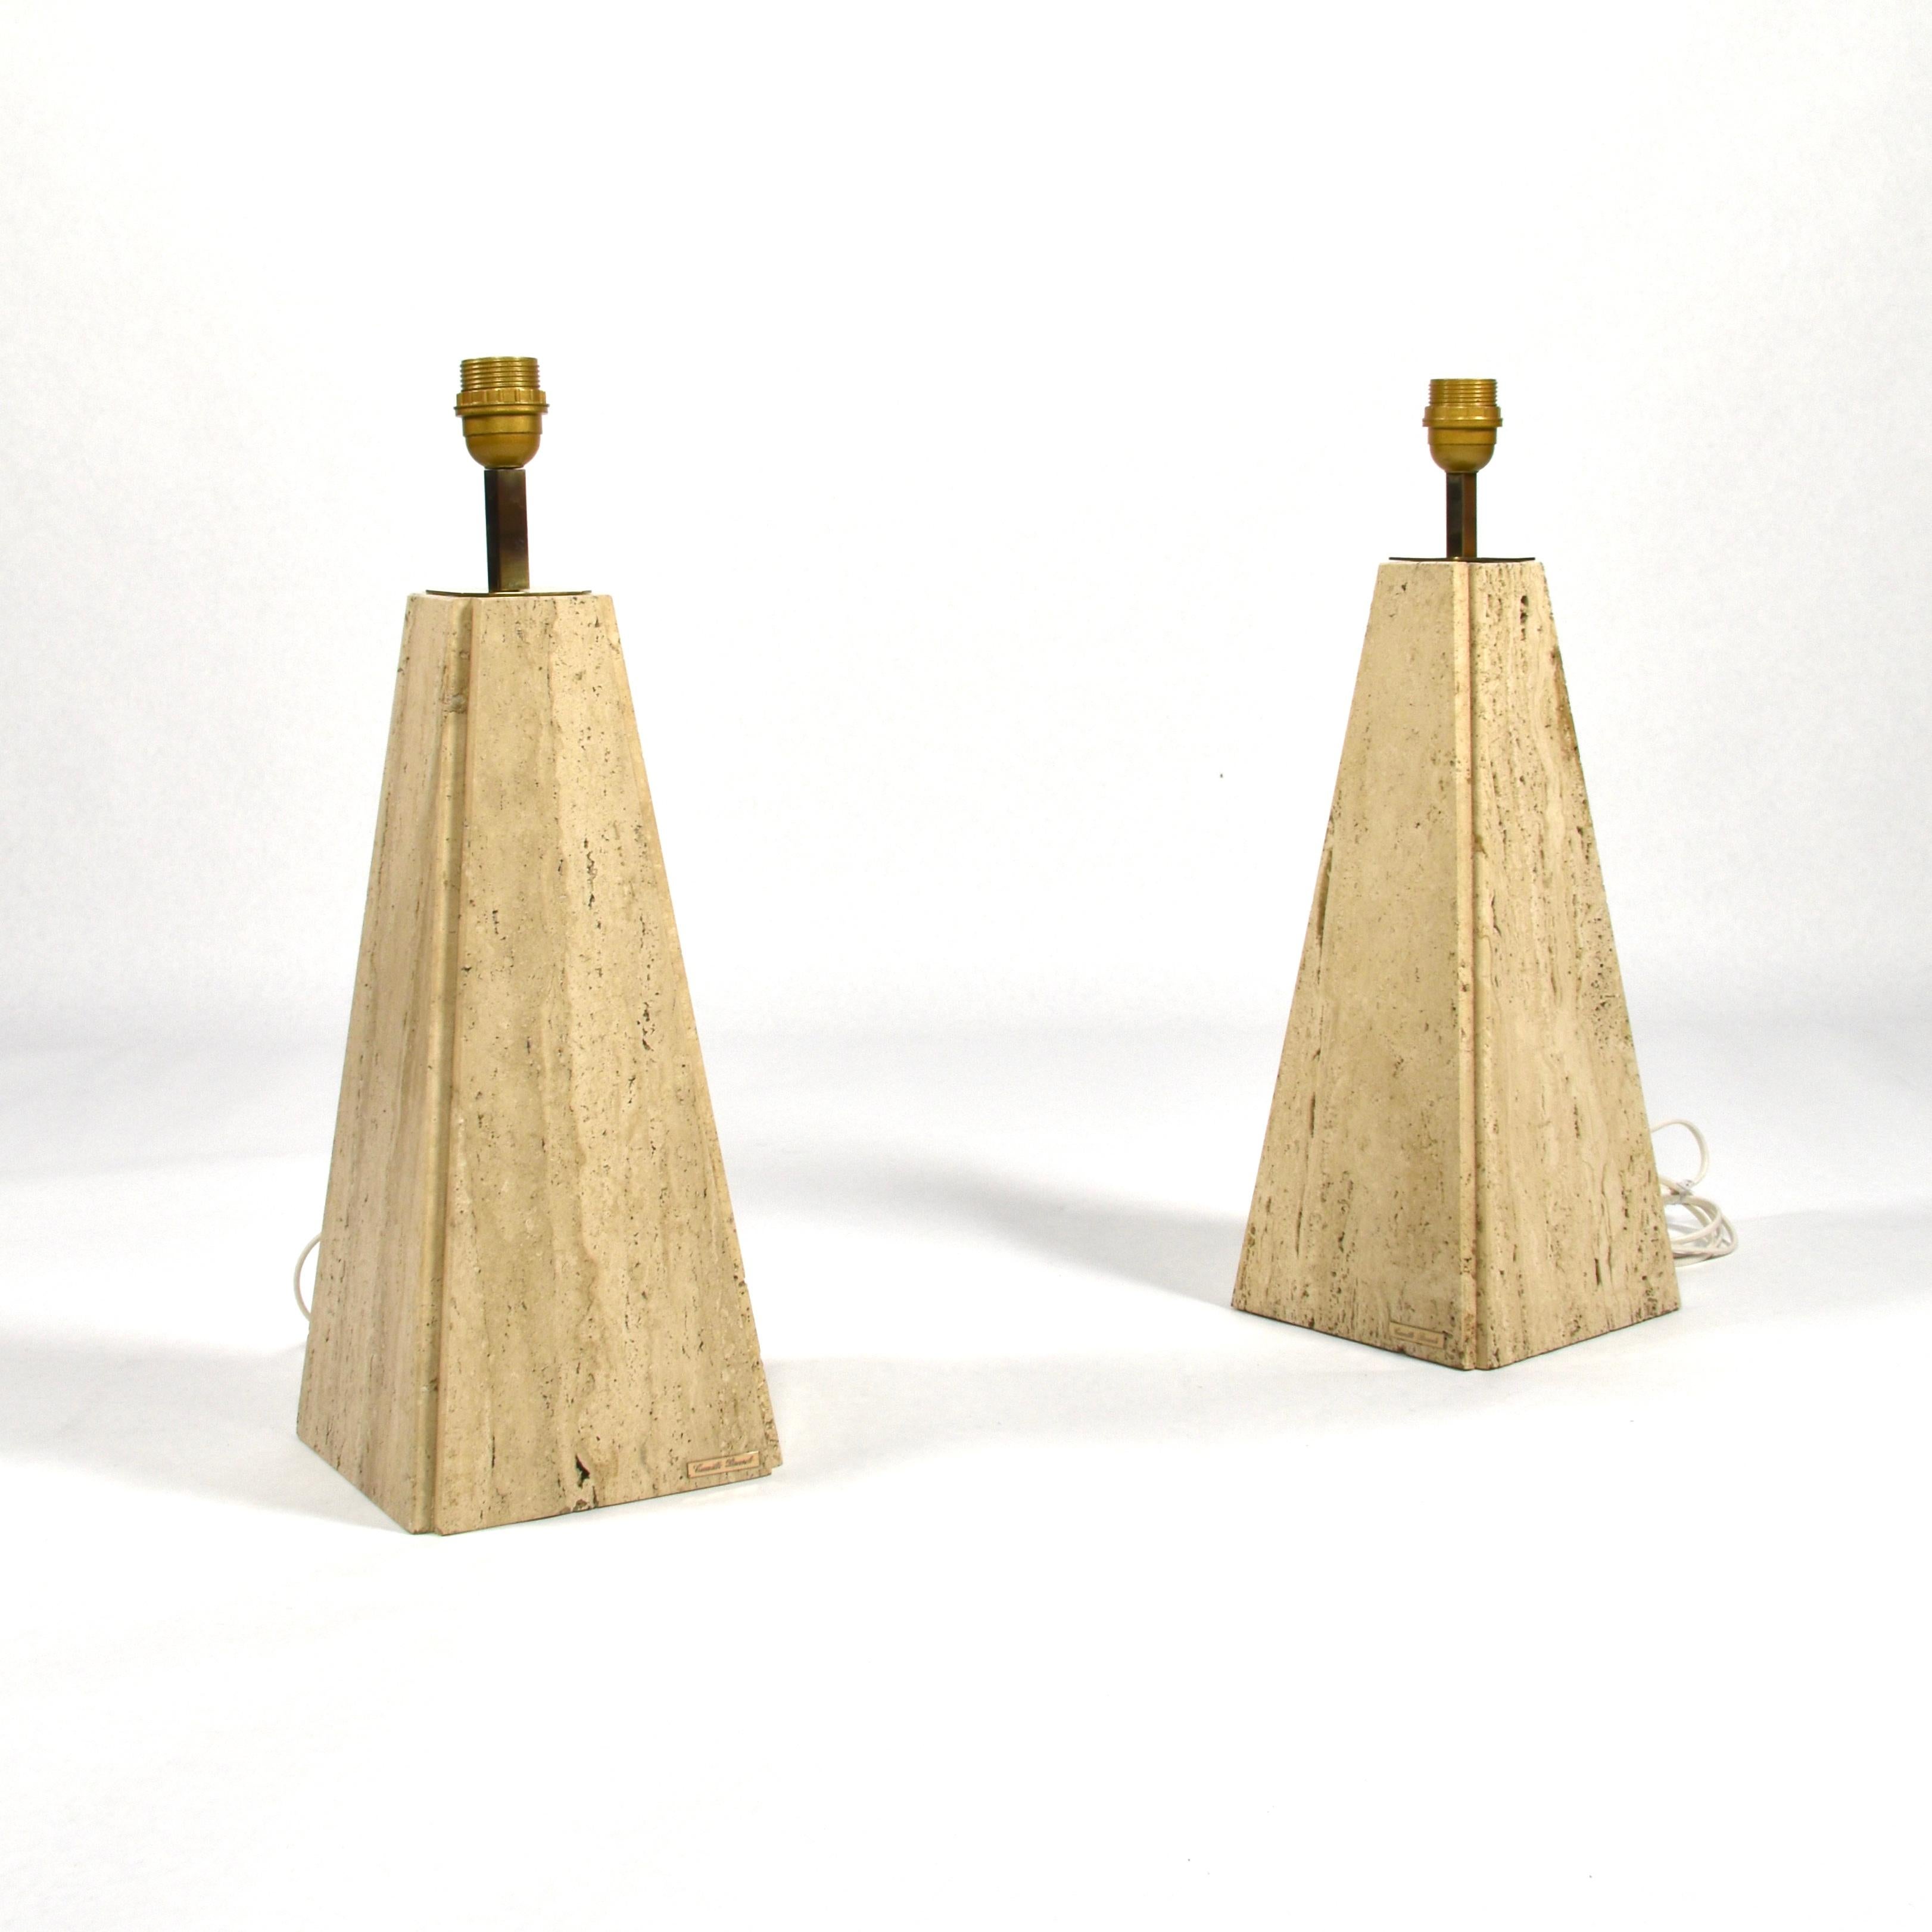 Mid-Century Modern Pair of Camille Breesch Travertine and Brass Table Lamps, Belgium, circa 1970